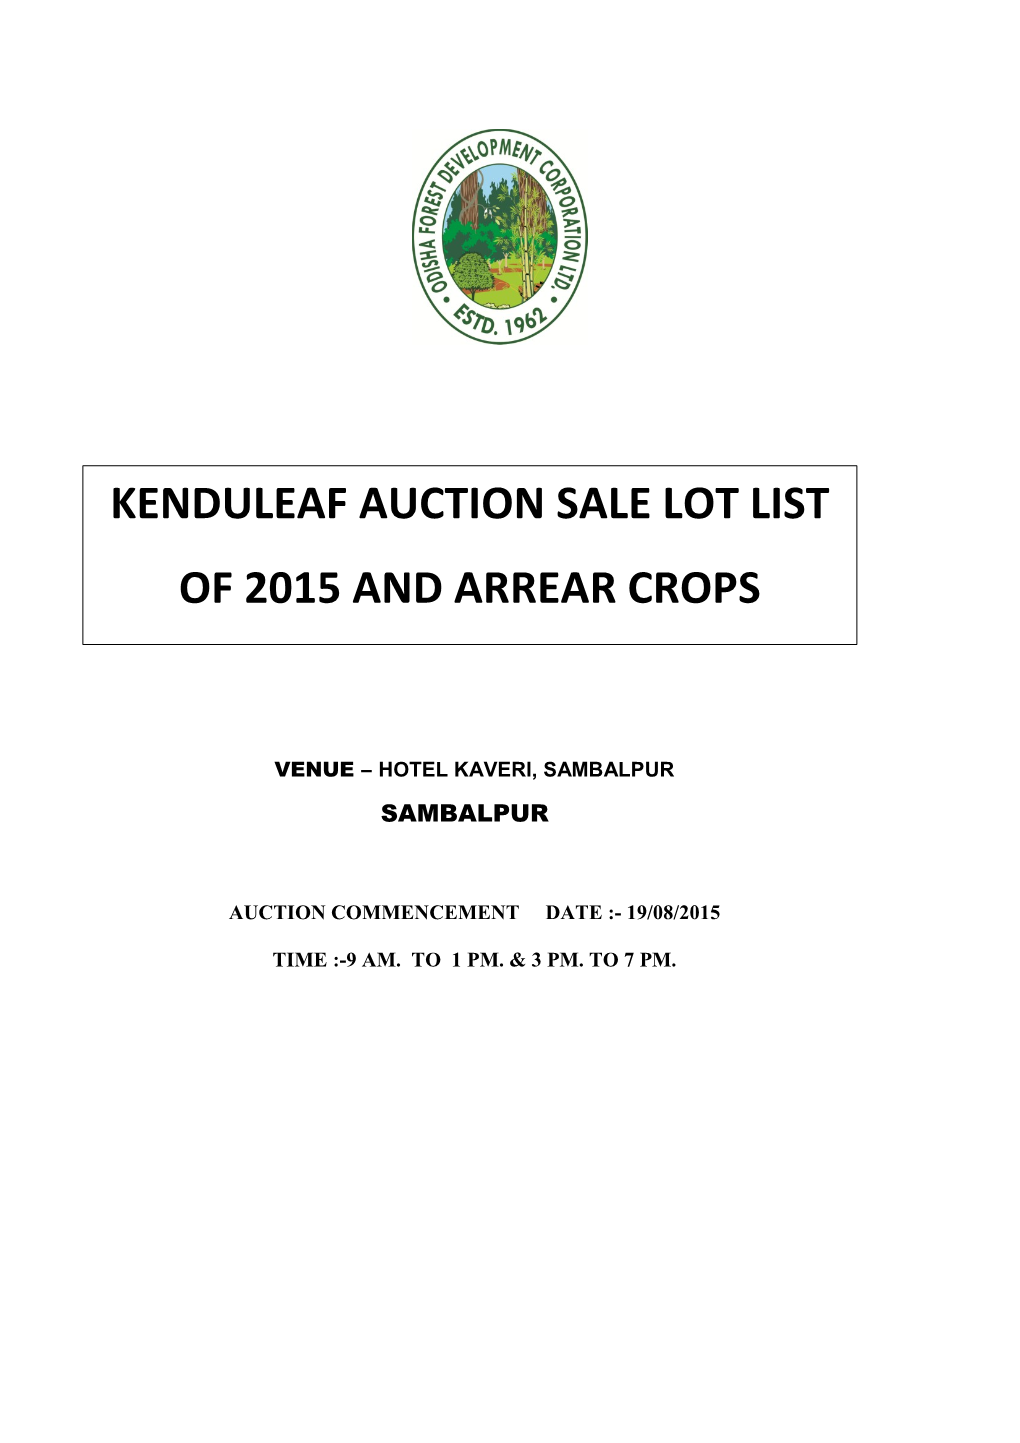 Kenduleaf Auction Sale Lot List of 2015 and Arrear Crops